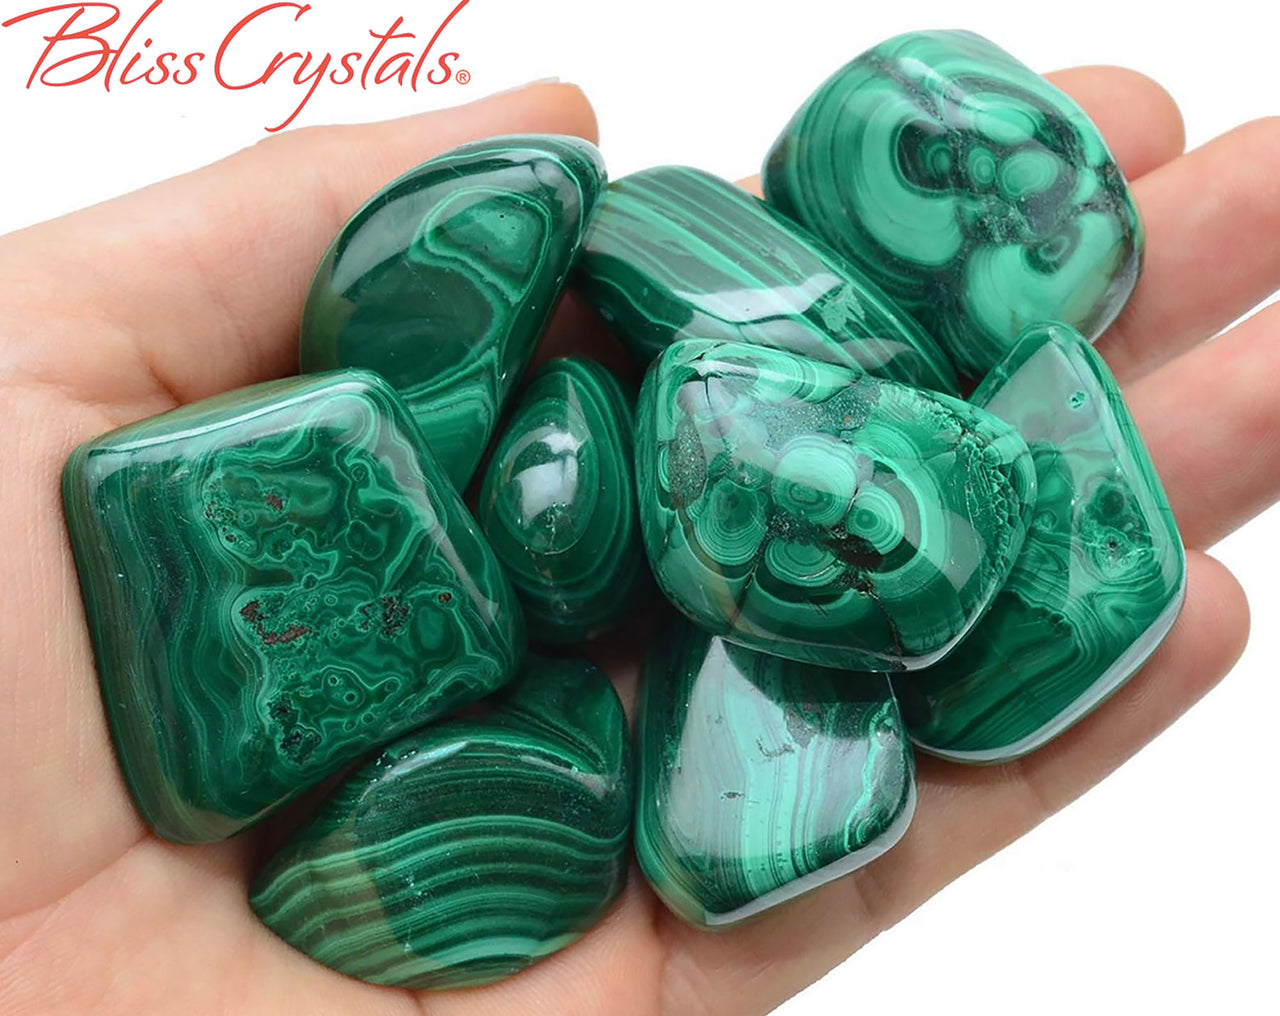 1 Jumbo MALACHITE Tumbled Stone Healing Crystal and Stone for Protection Memory Health Reiki Wicca Green Stone #MT06